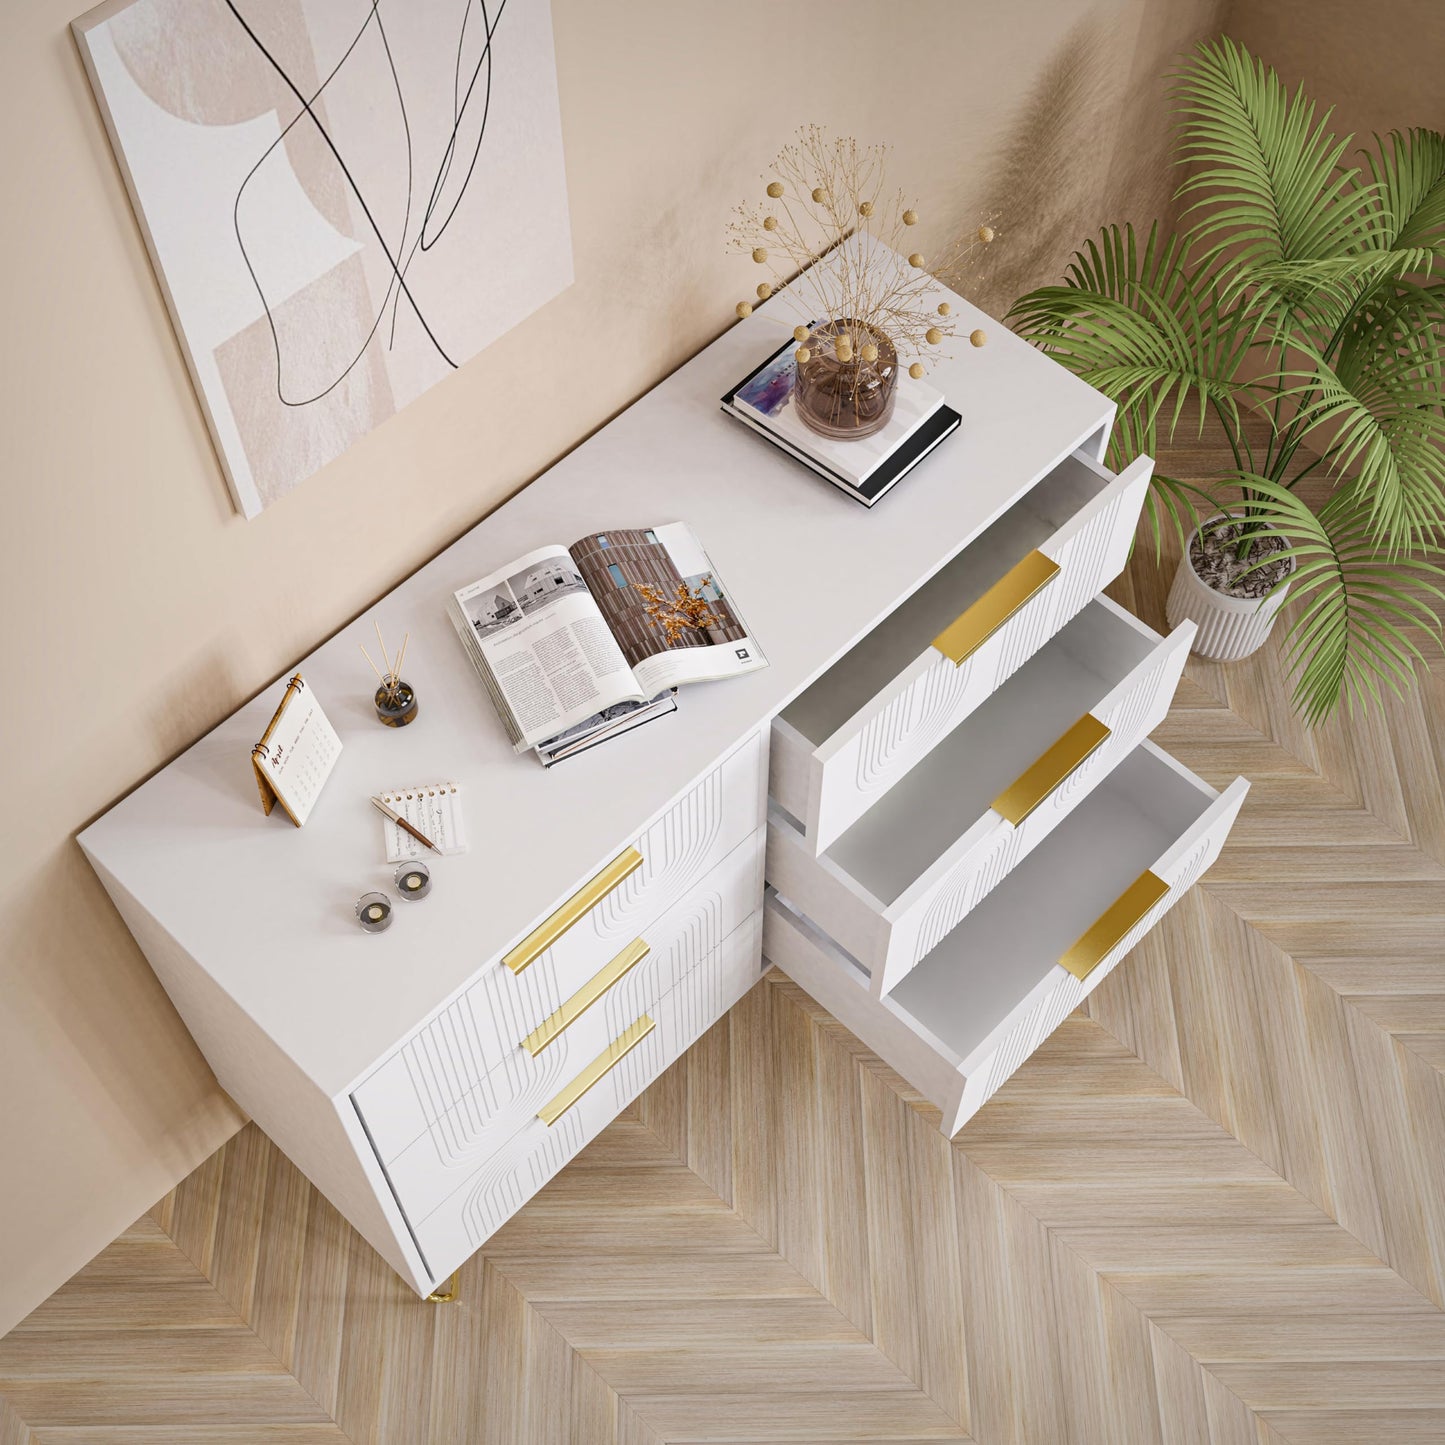 NEWOWNDS Fluted 6 Drawer Dresser,41" W*26H Modern Chest of Drawers with Stable 5 Golden Legs，Unique Curve Profile Design for Bedroom, Living Room,Entryway,Hallway,Solid White